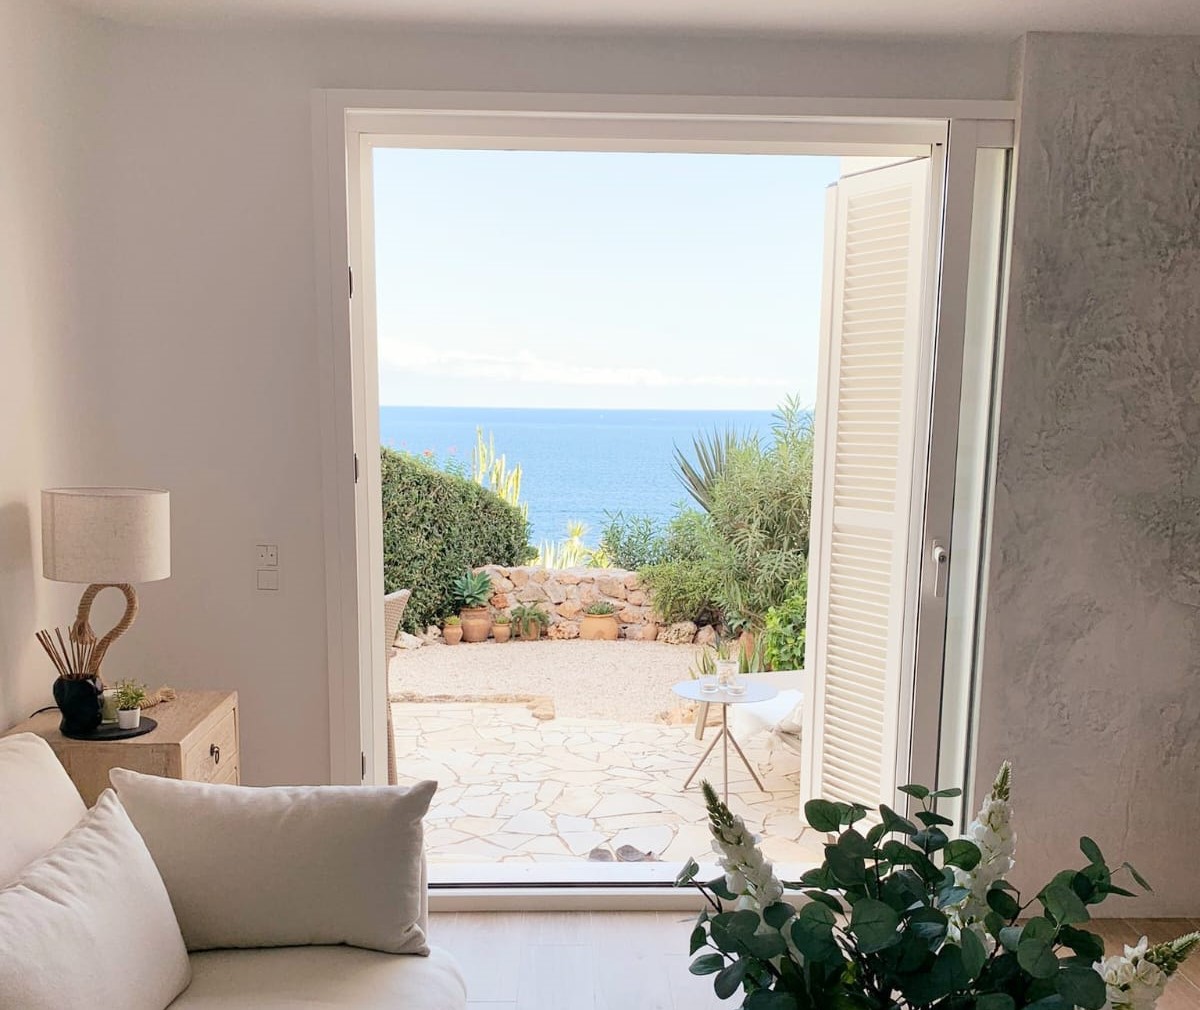 Sale: luxury home with seaviews in Cala Pi